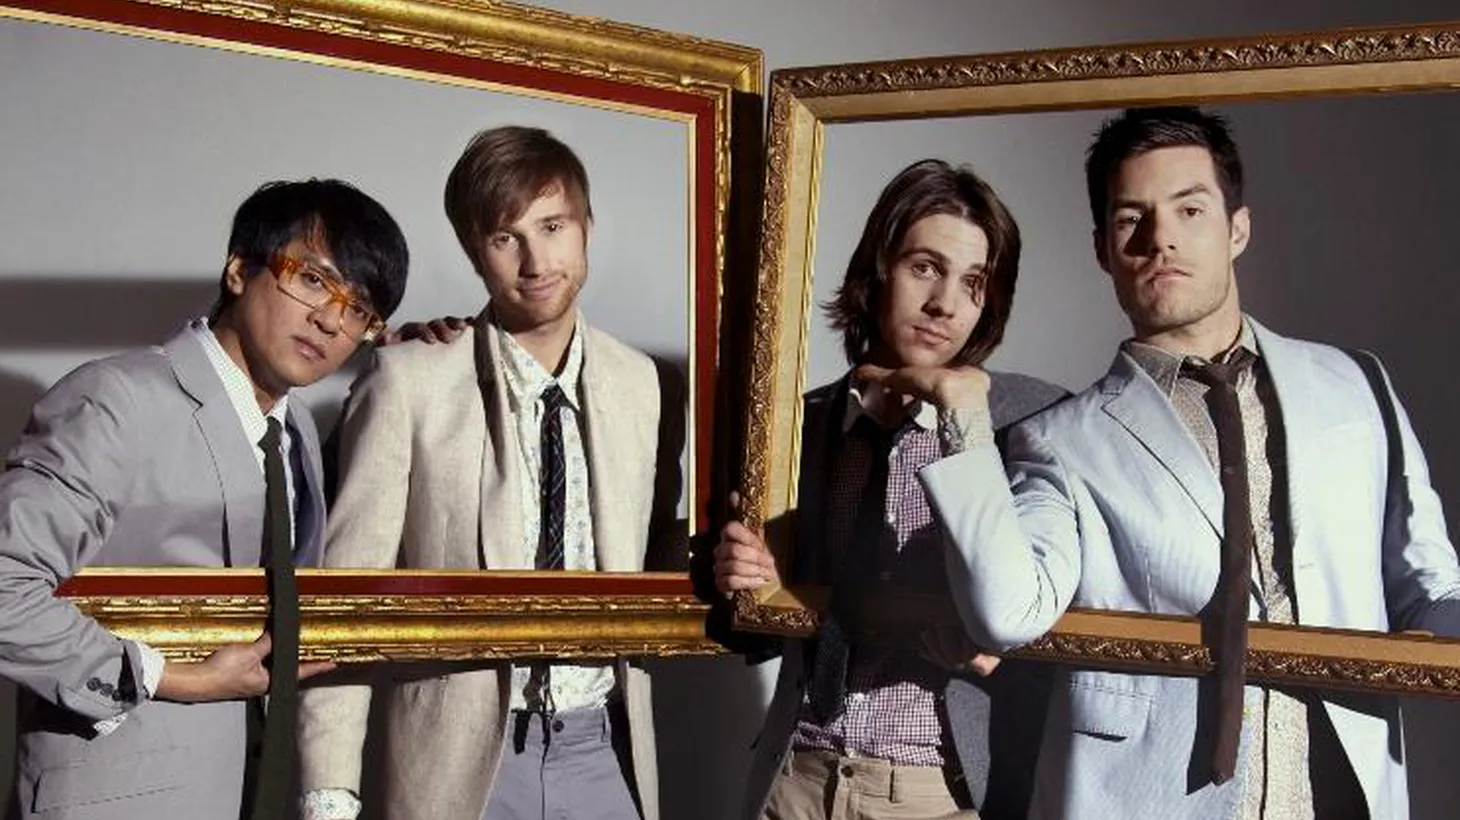 Not only are L.A.'s Saint Motel talented indie-pop stars in the making, but they are also gifted cinematographers who started making music together in film school. They’ll bring their impressive live show to Morning Becomes Eclectic at 11:15am.